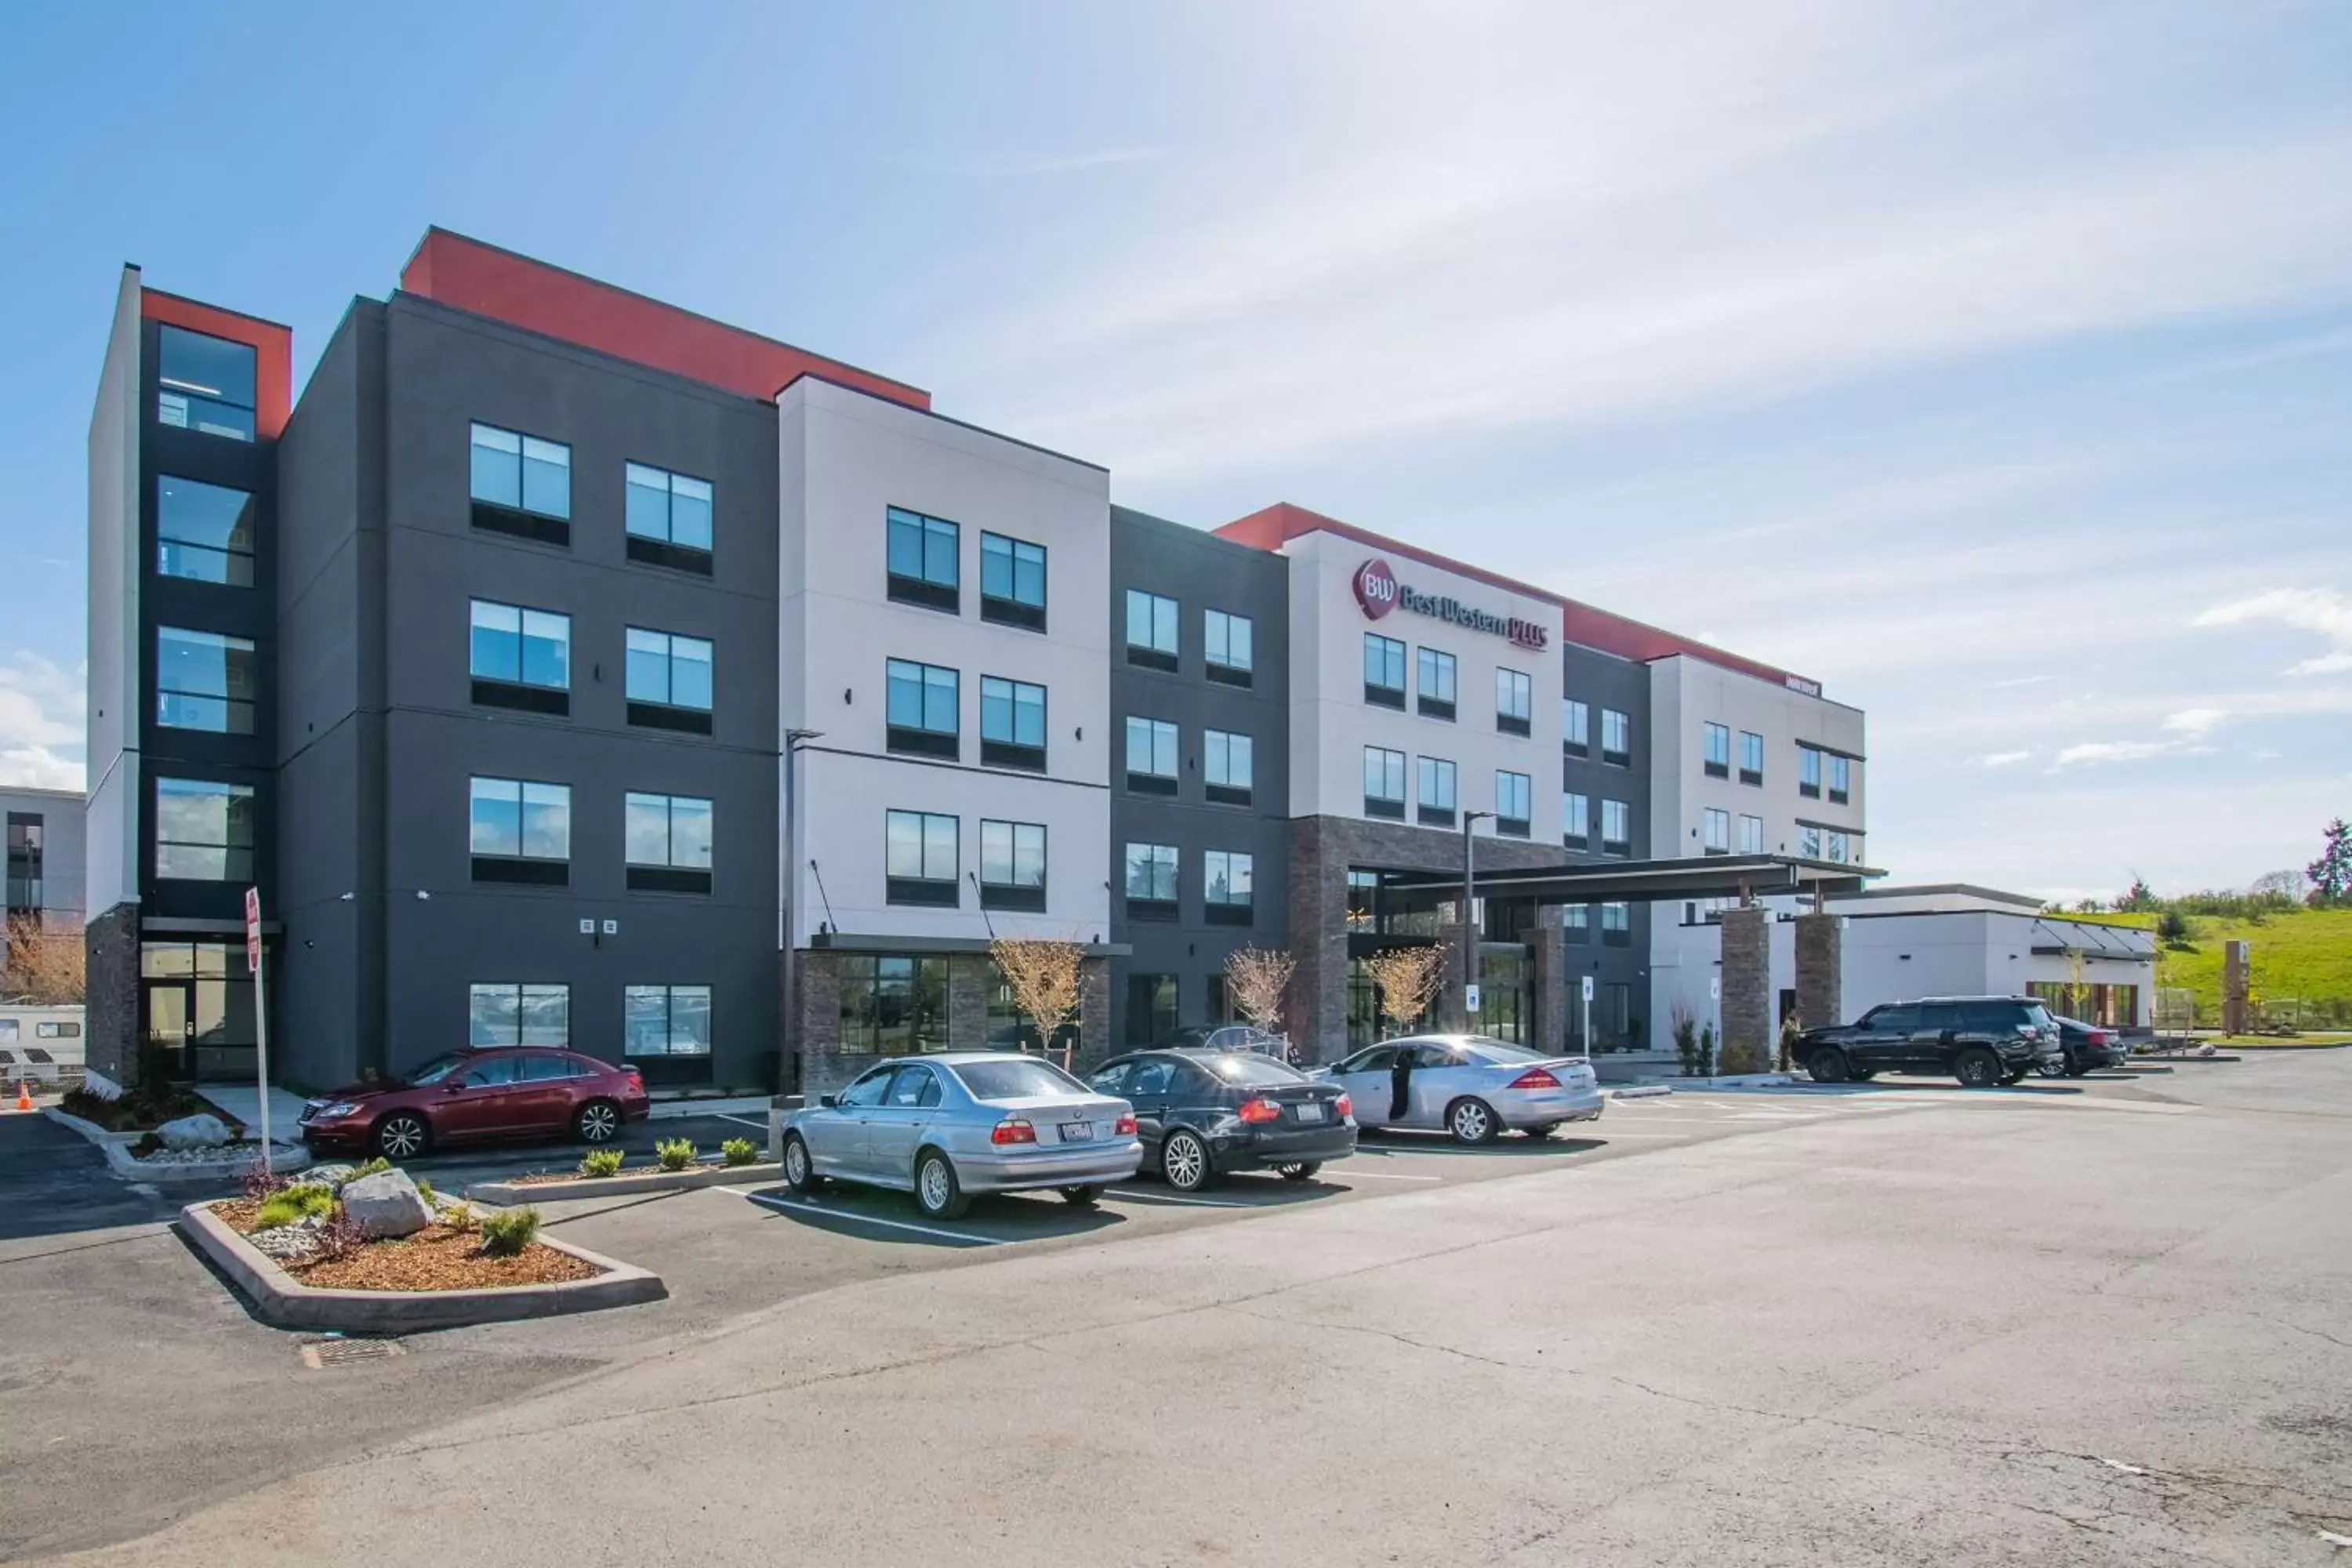 Property Building in Best Western Plus Tacoma Hotel